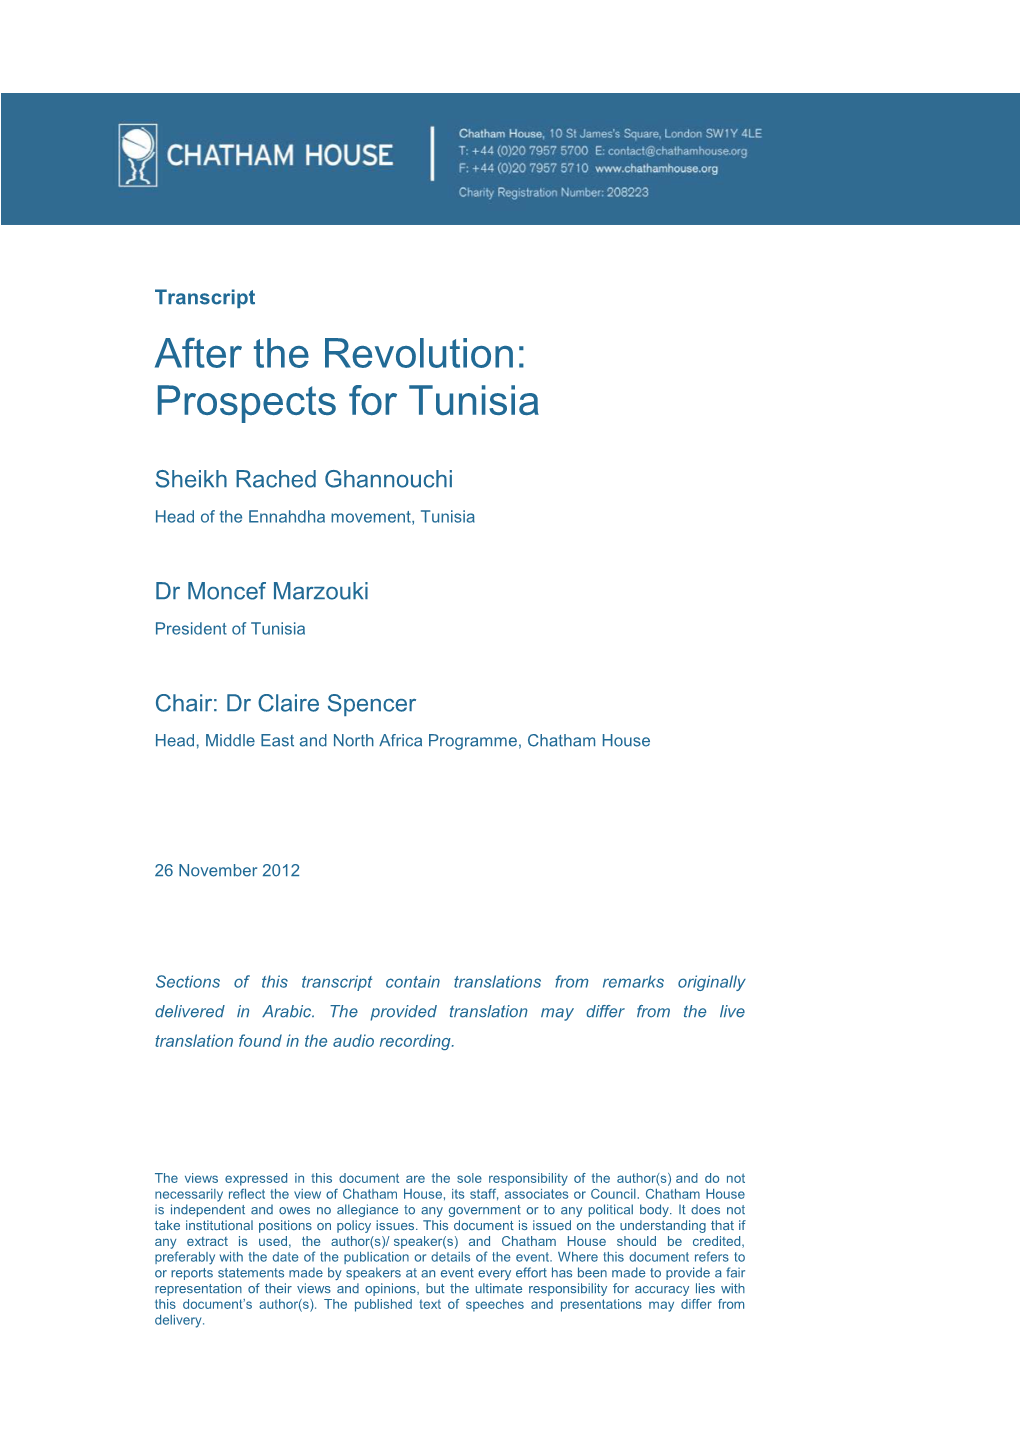 After the Revolution: Prospects for Tunisia